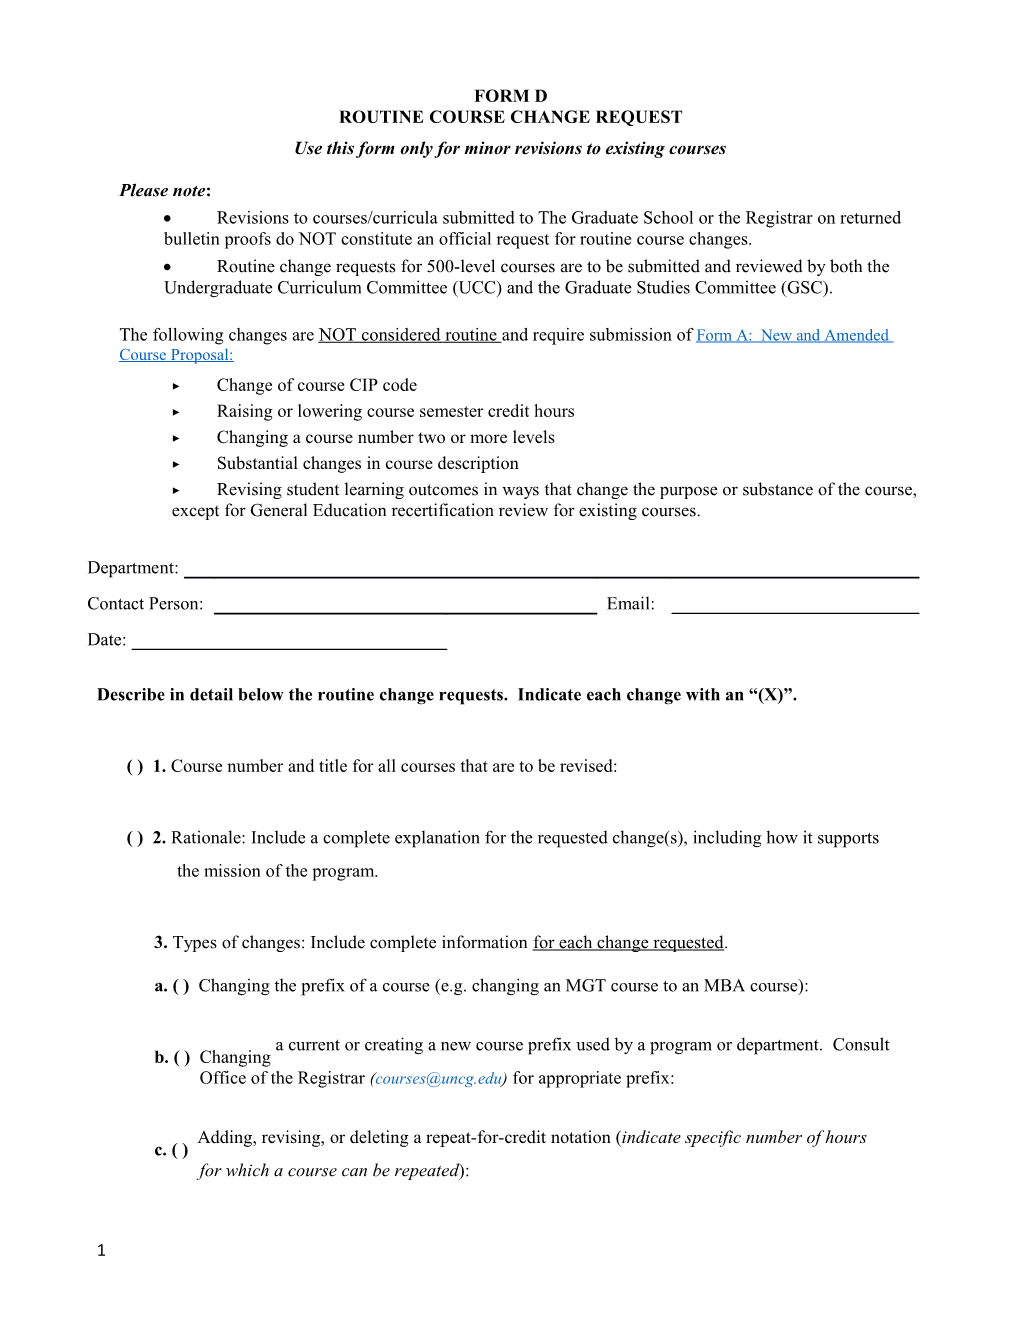 Use This Form Only for Minor Revisions to Existing Courses